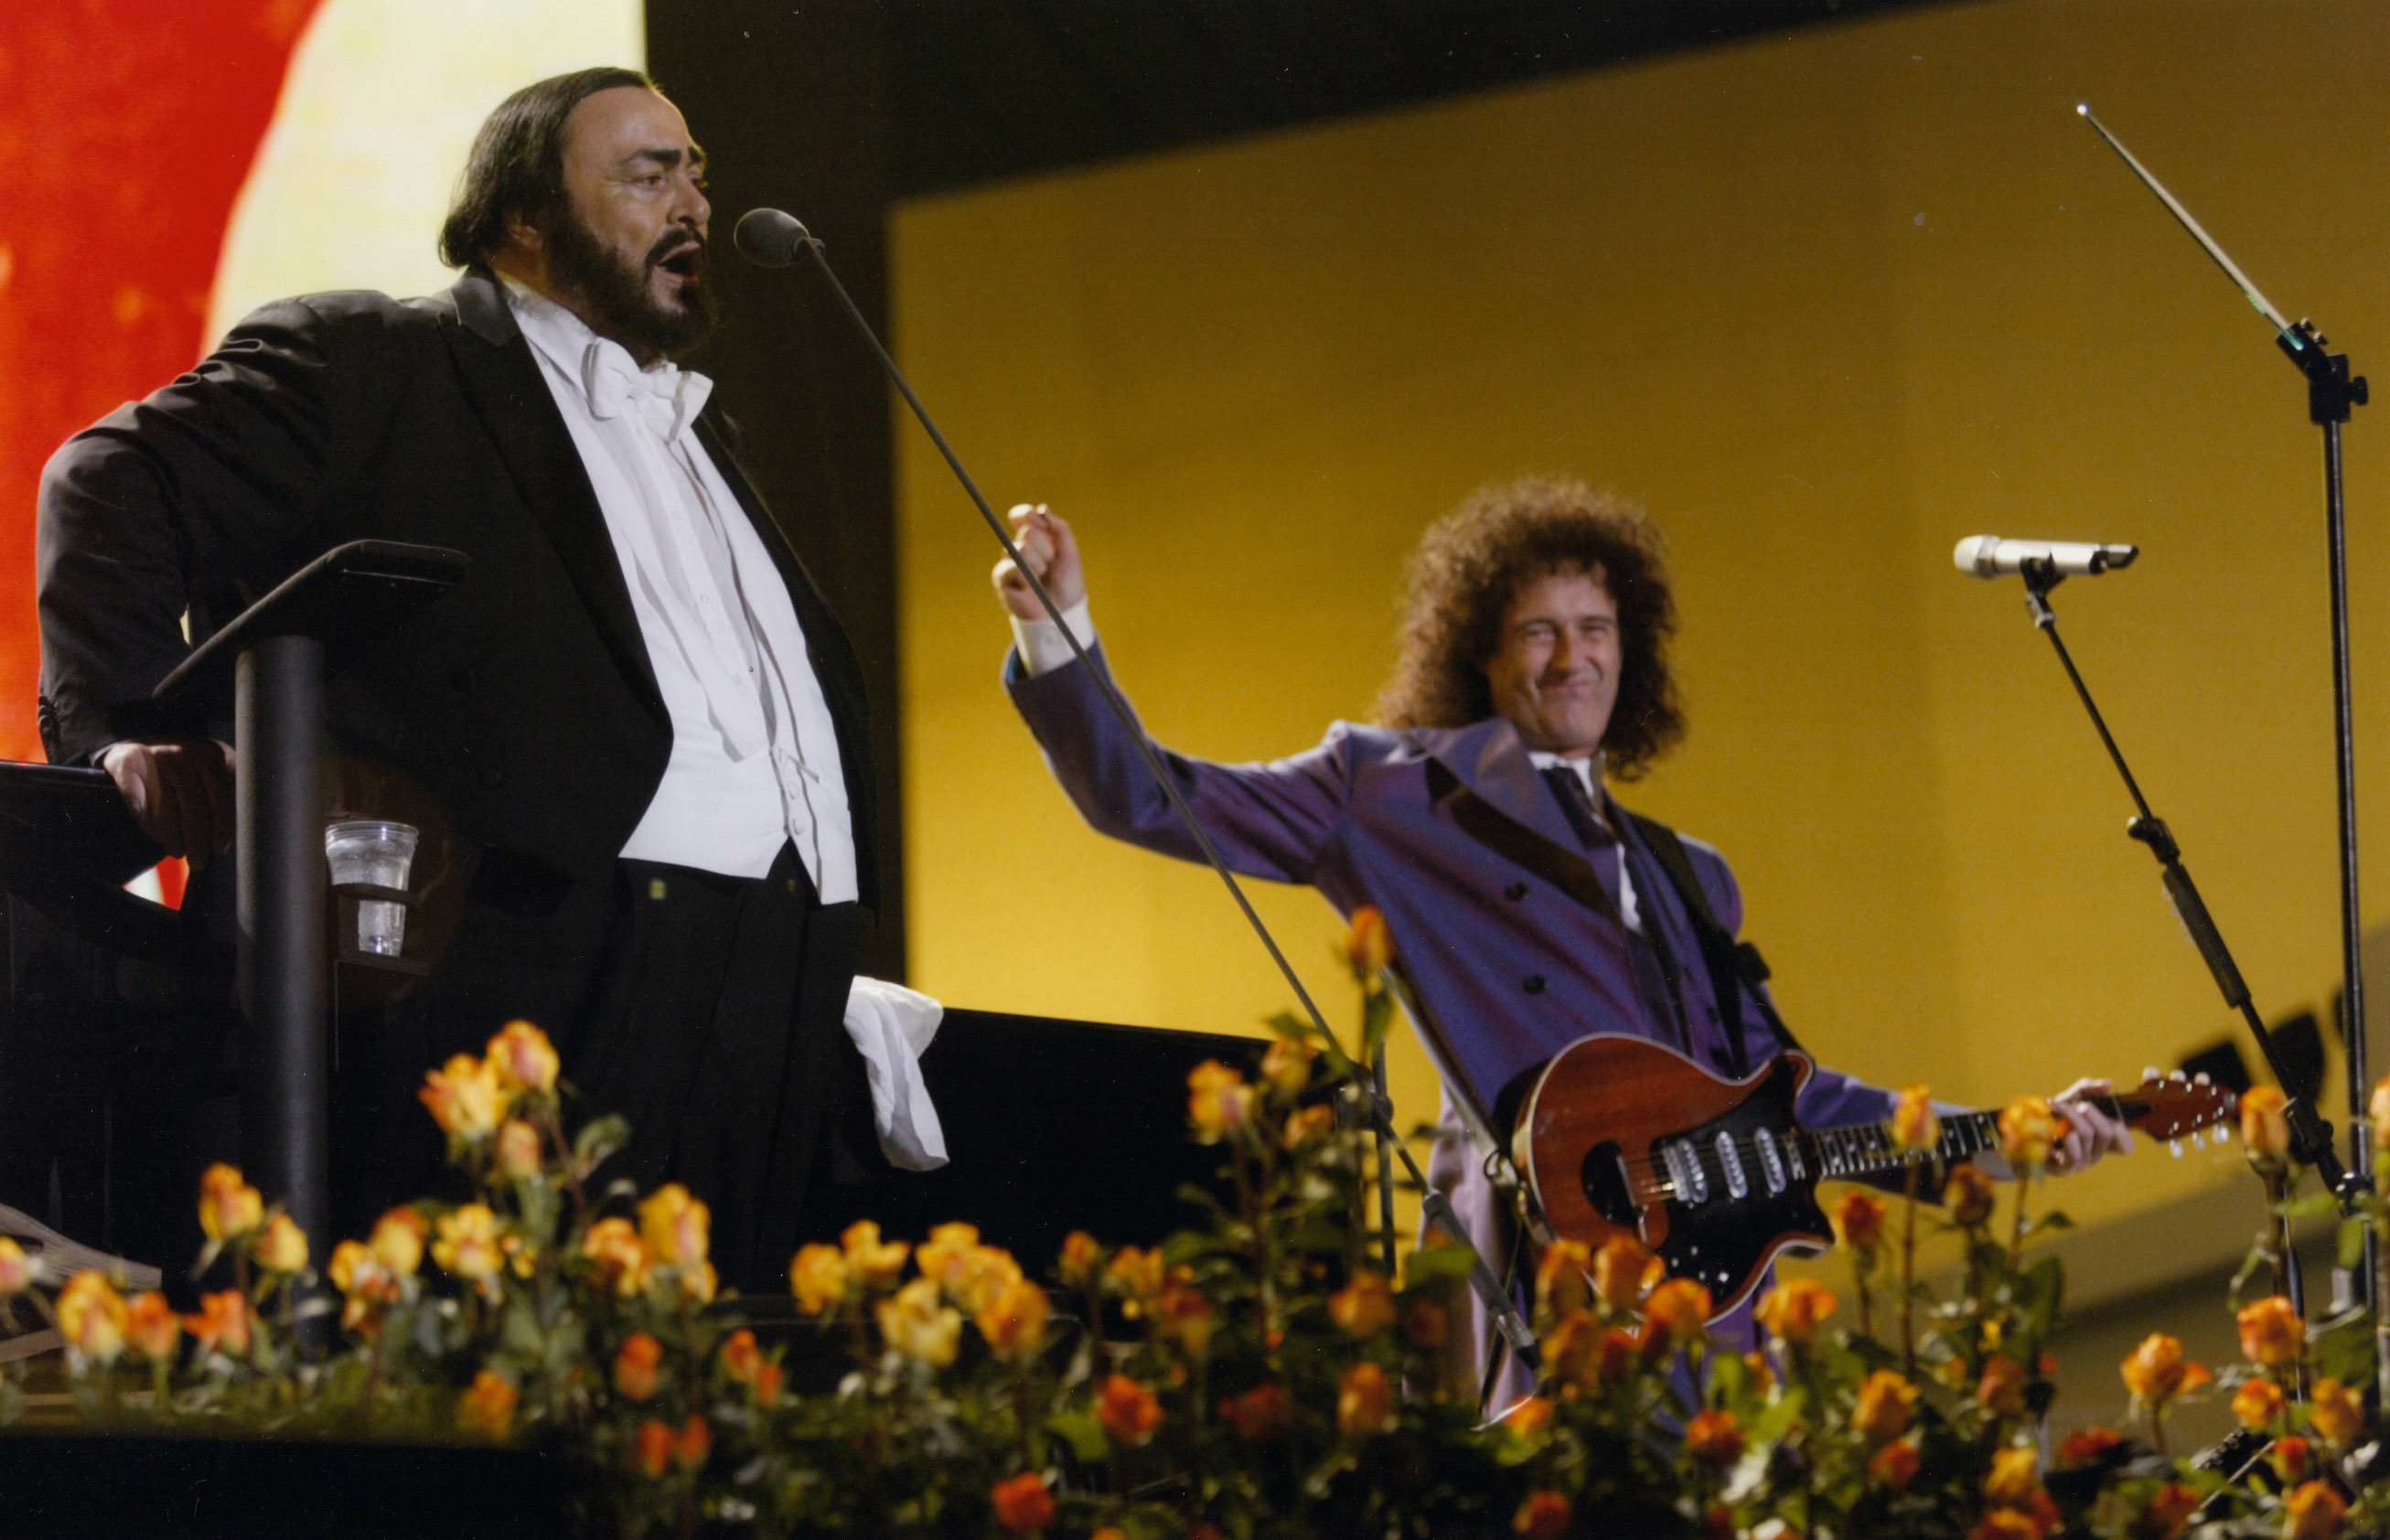 A rare duet of Pavarotti (left) and Brian May from the Pavarotti And Friends benefit concerts